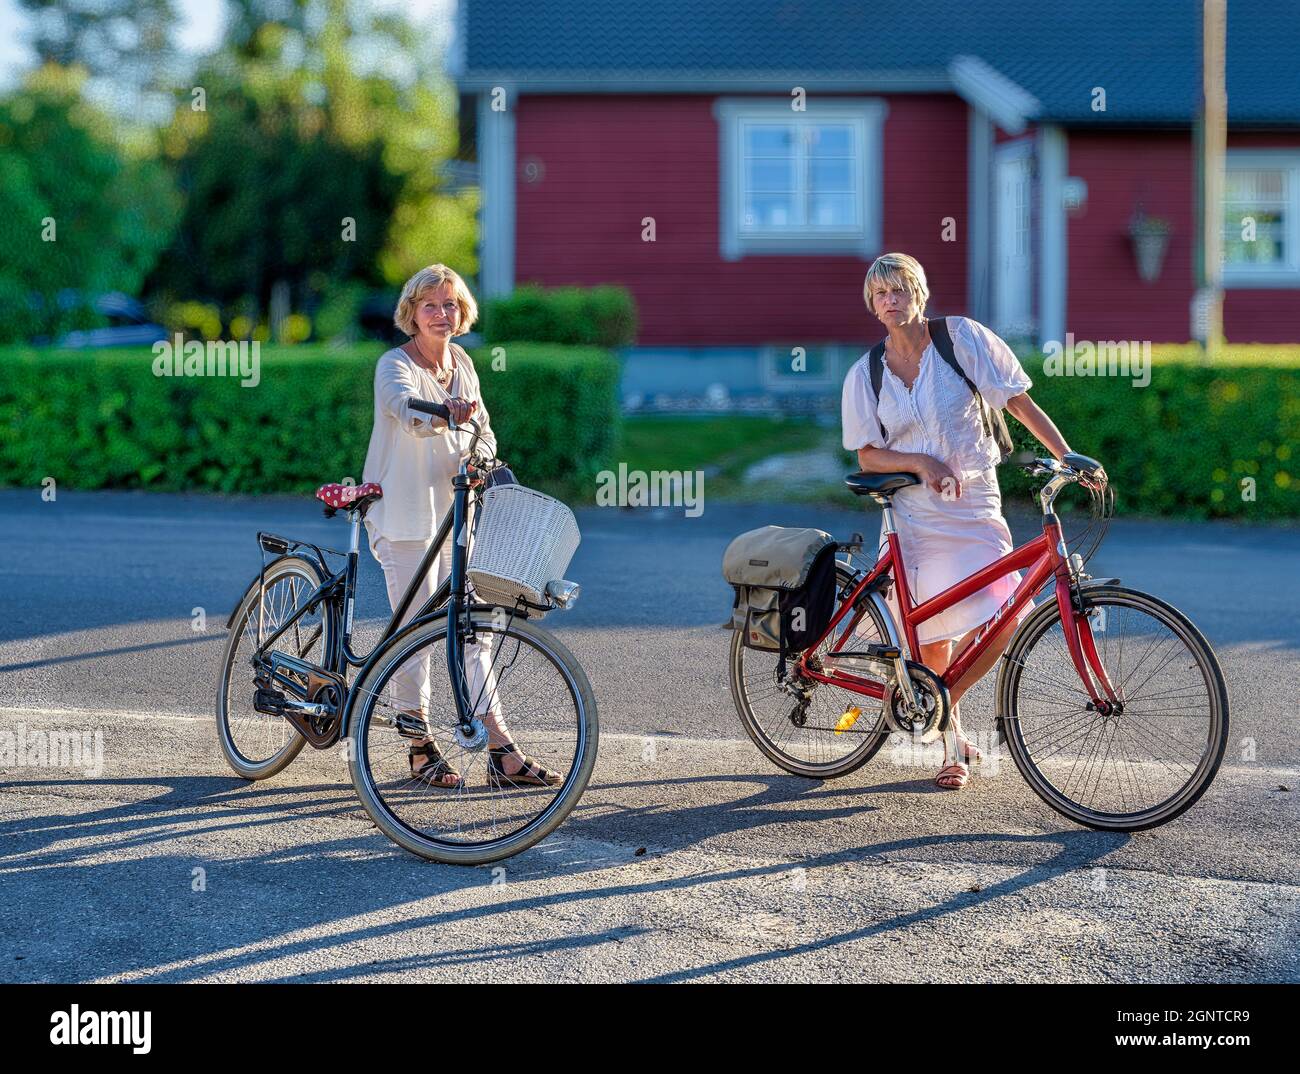 Two women taking a break during an evening ride on bicycles Stock Photo